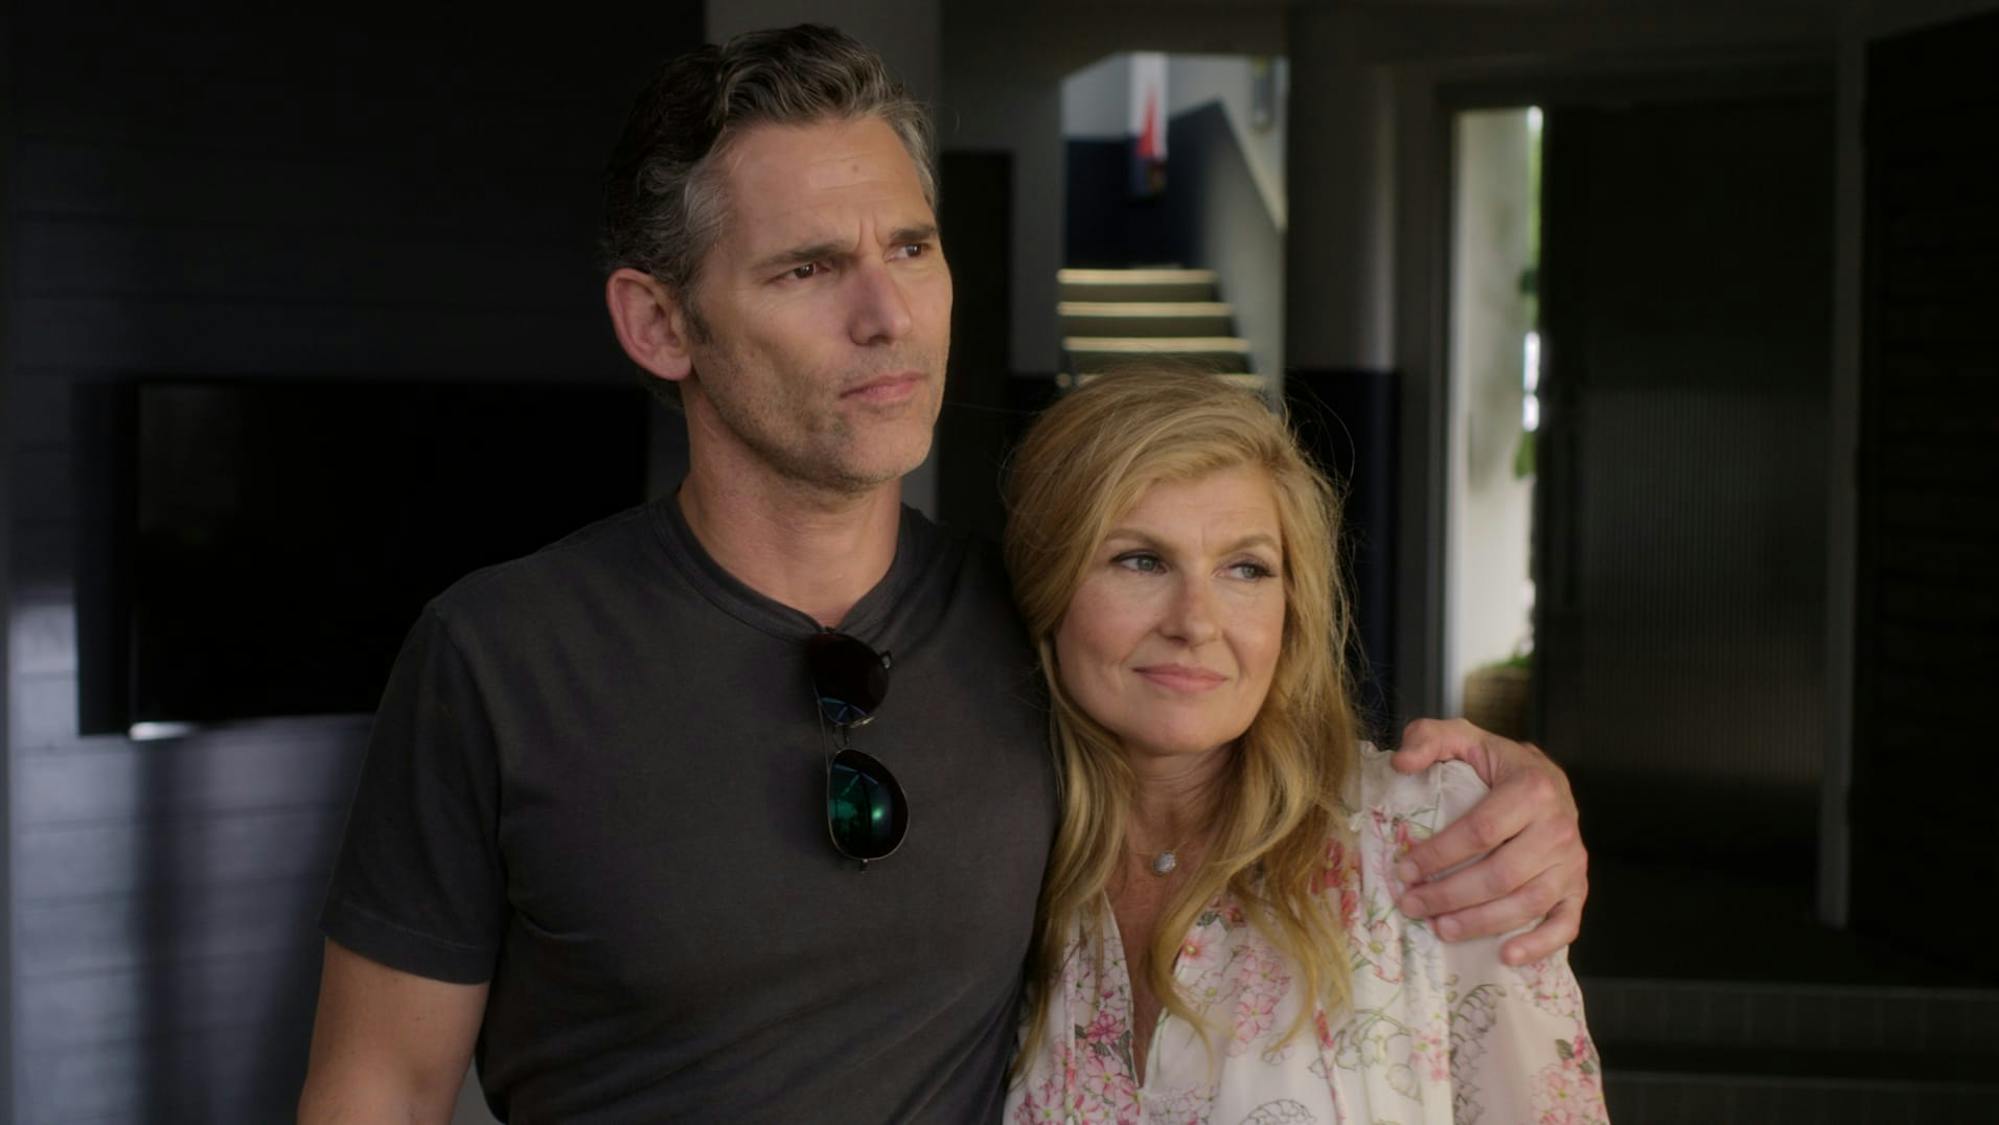 Connie Britton and Eric Bana stand together in Dirty John. He has his arm around her, and they stand in semi darkness.